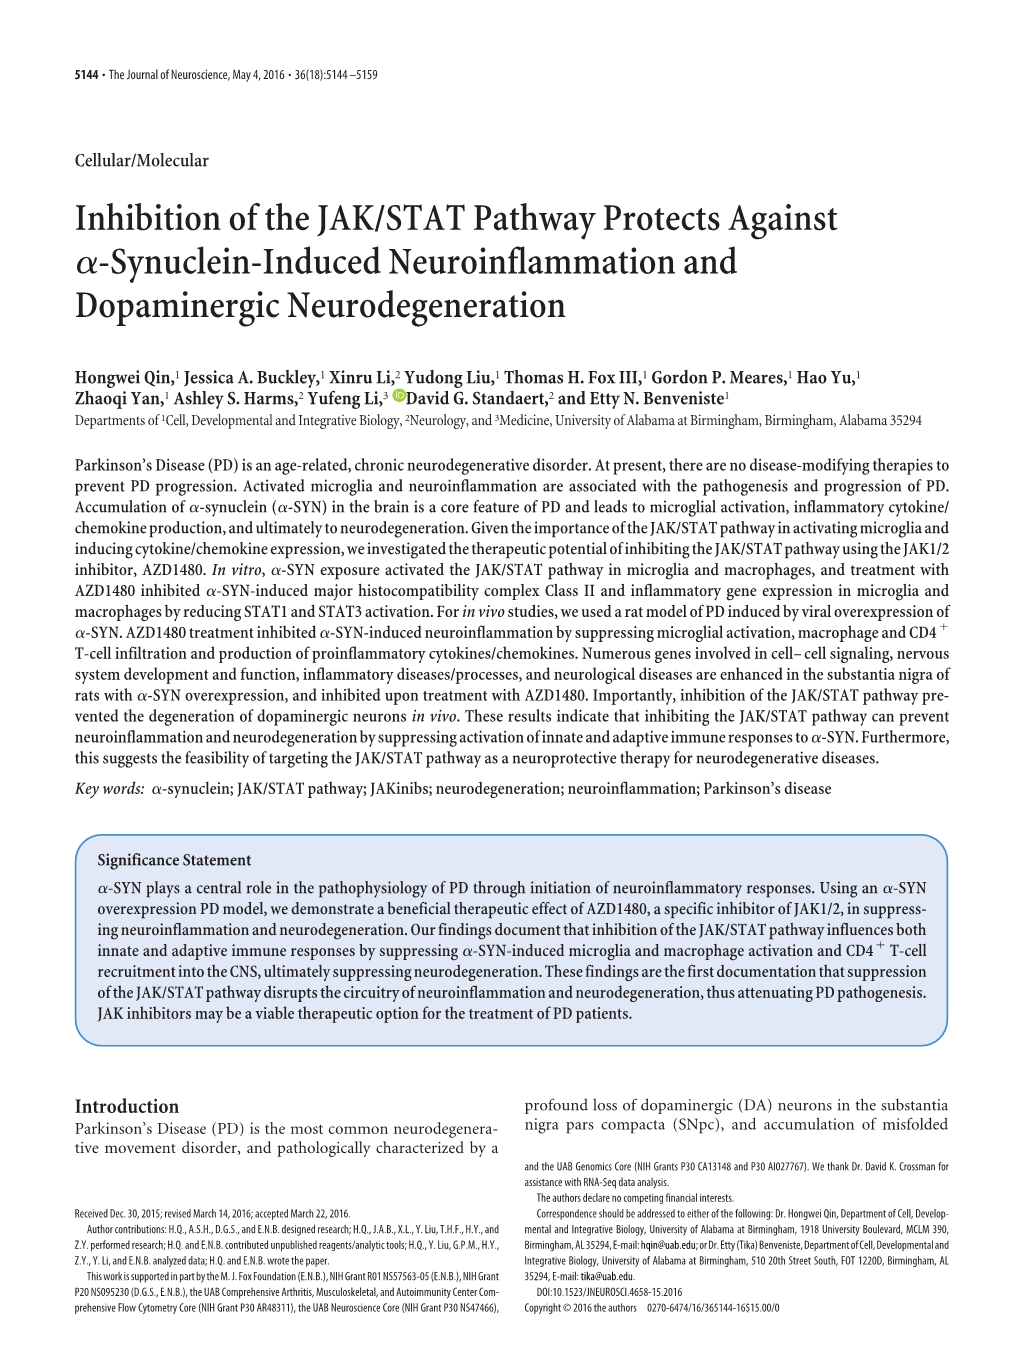 Inhibition of the JAK/STAT Pathway Protects Against Α-Synuclein